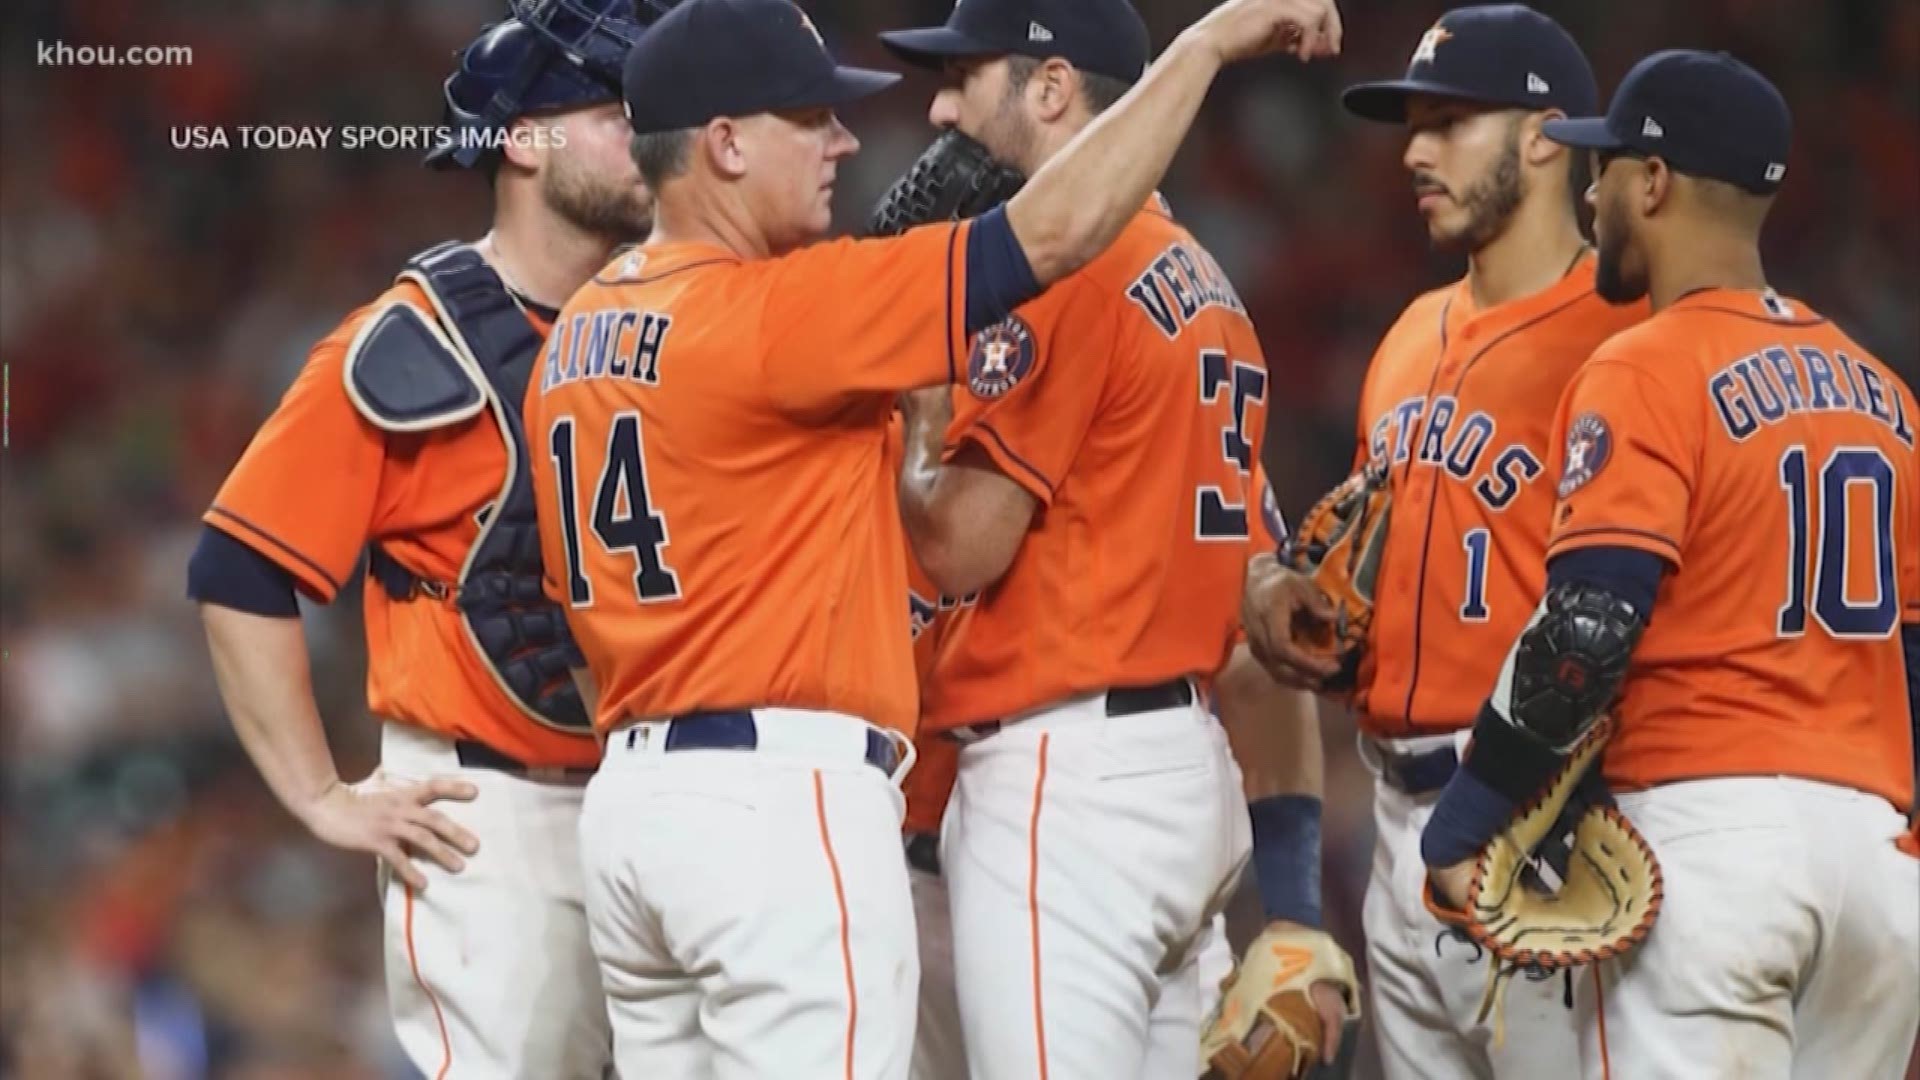 On Tuesday night, a report surfaced that the defending World Series champion Houston Astros may have been caught trying to steal signs during Game 1 of the American League Championship Series in Boston.